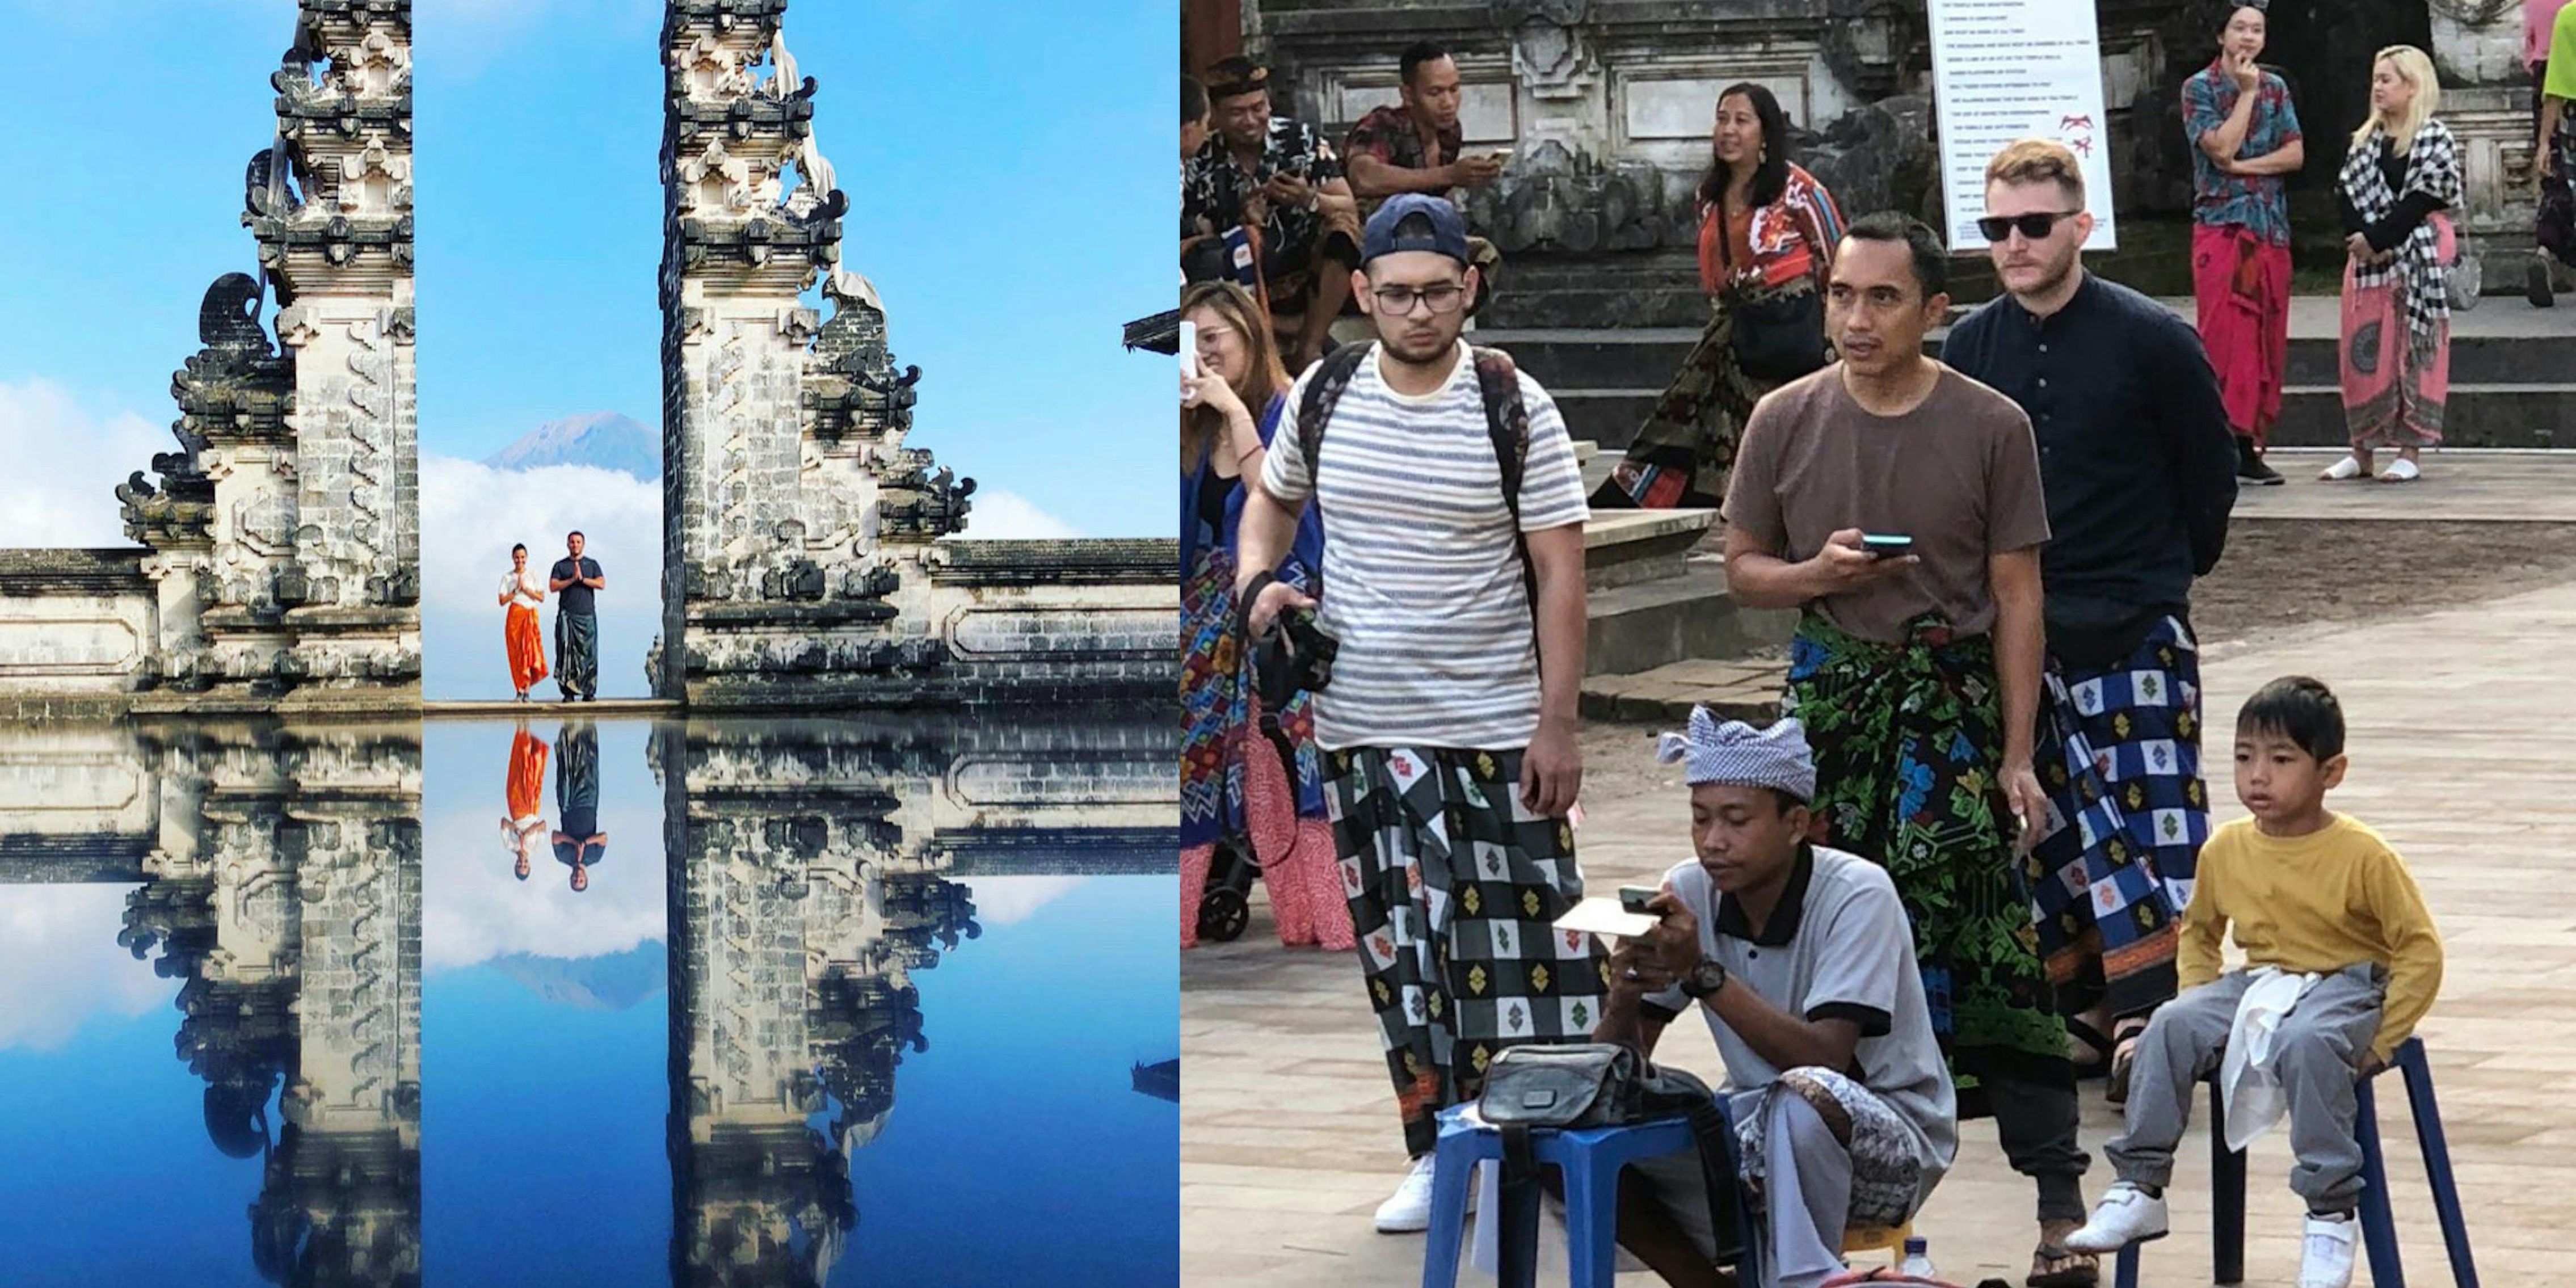 Left photo shows influencers' photos of Gates of Heaven seen in a reflection on a lake; right photo shows a man doctoring the image, surrounded by locals and tourists